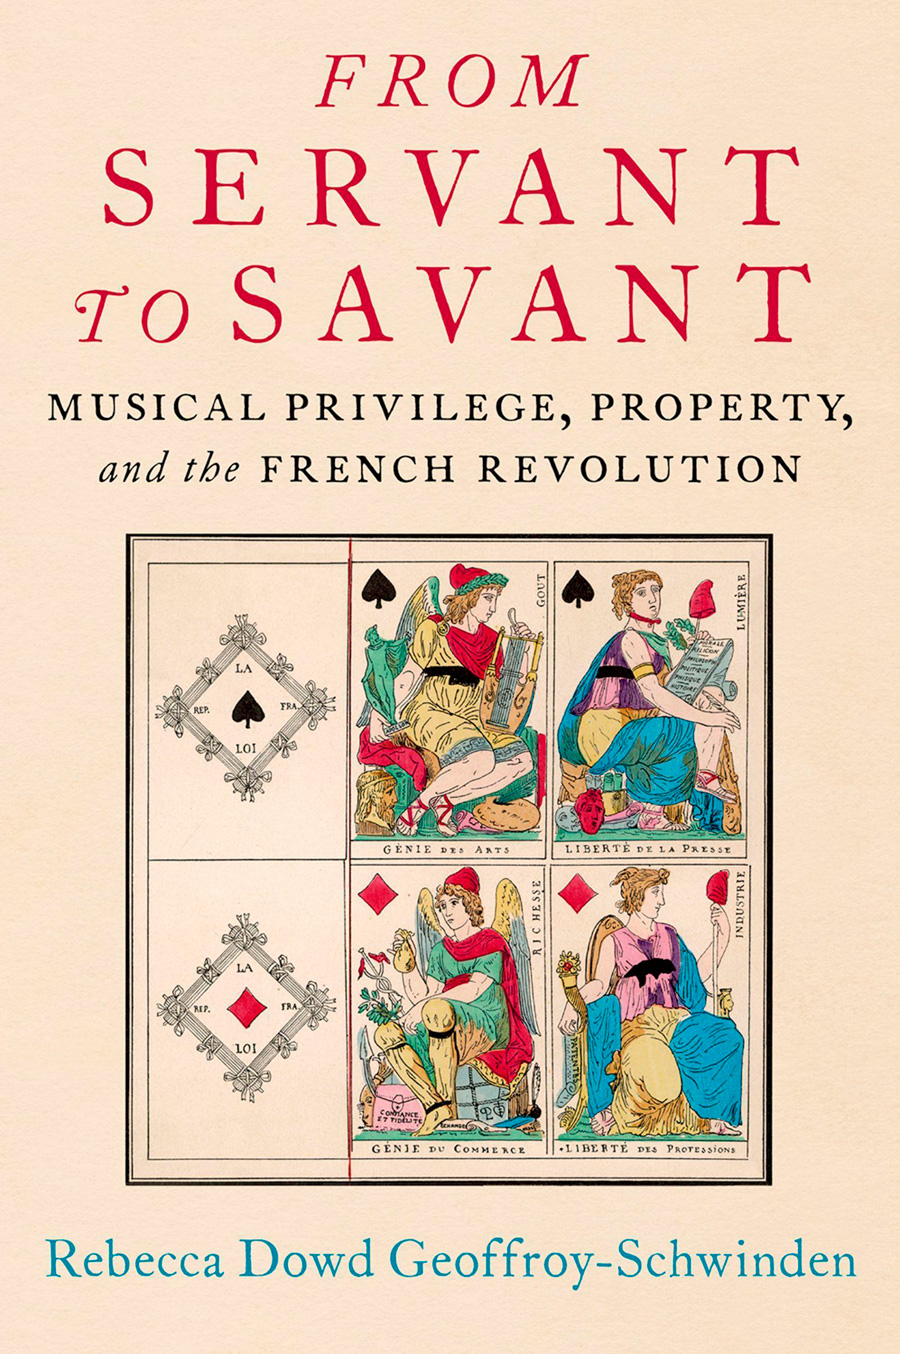 From Servant to Savant: Musical Privilege, Property and the French Revolution